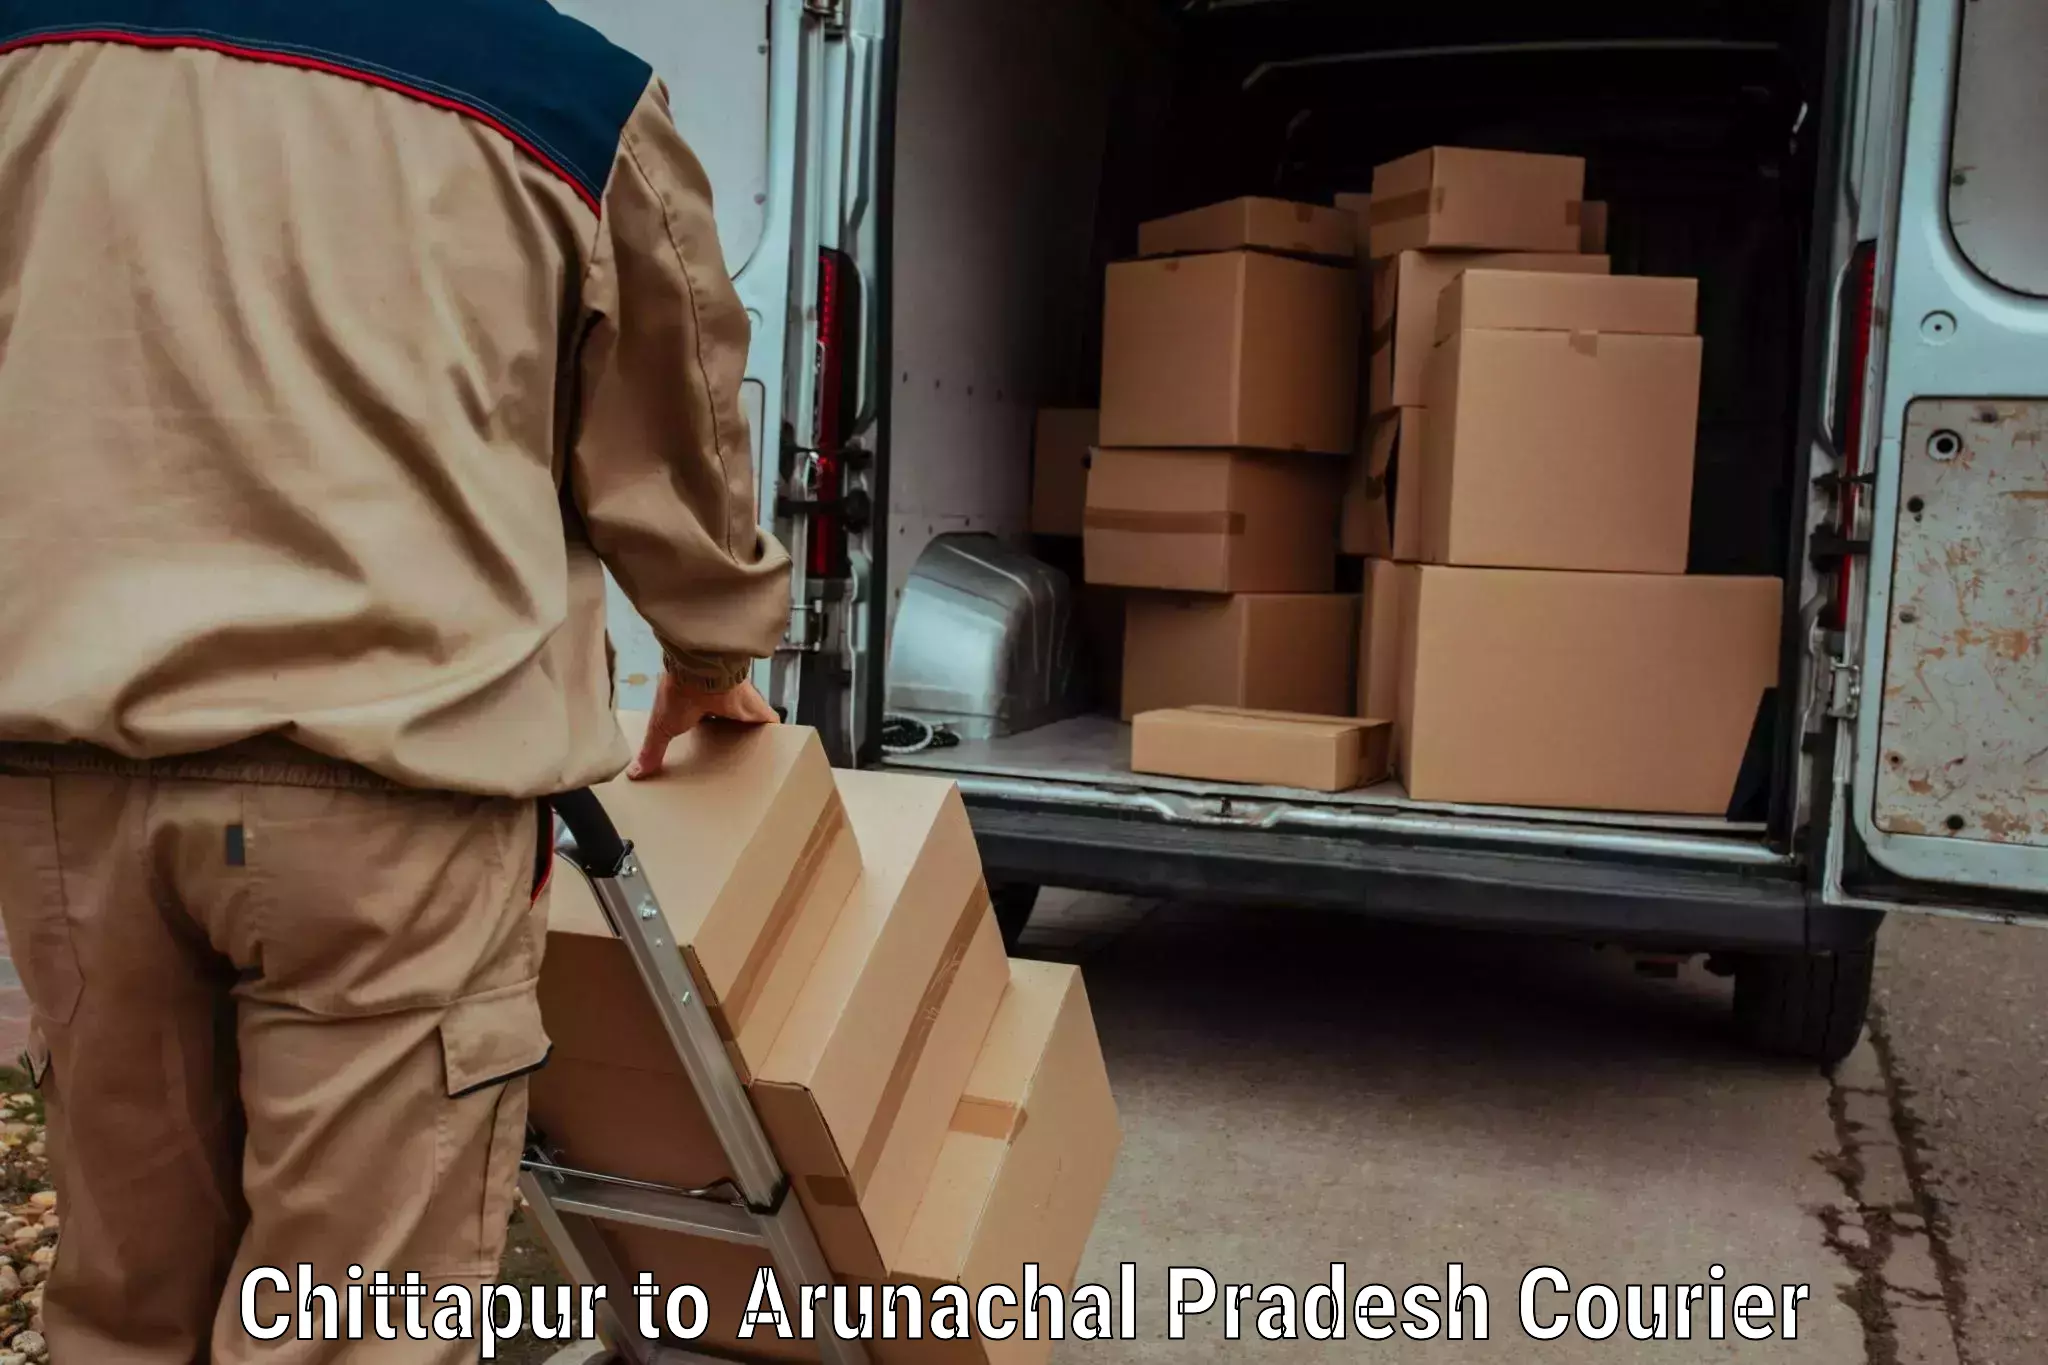 Courier service booking in Chittapur to Dirang